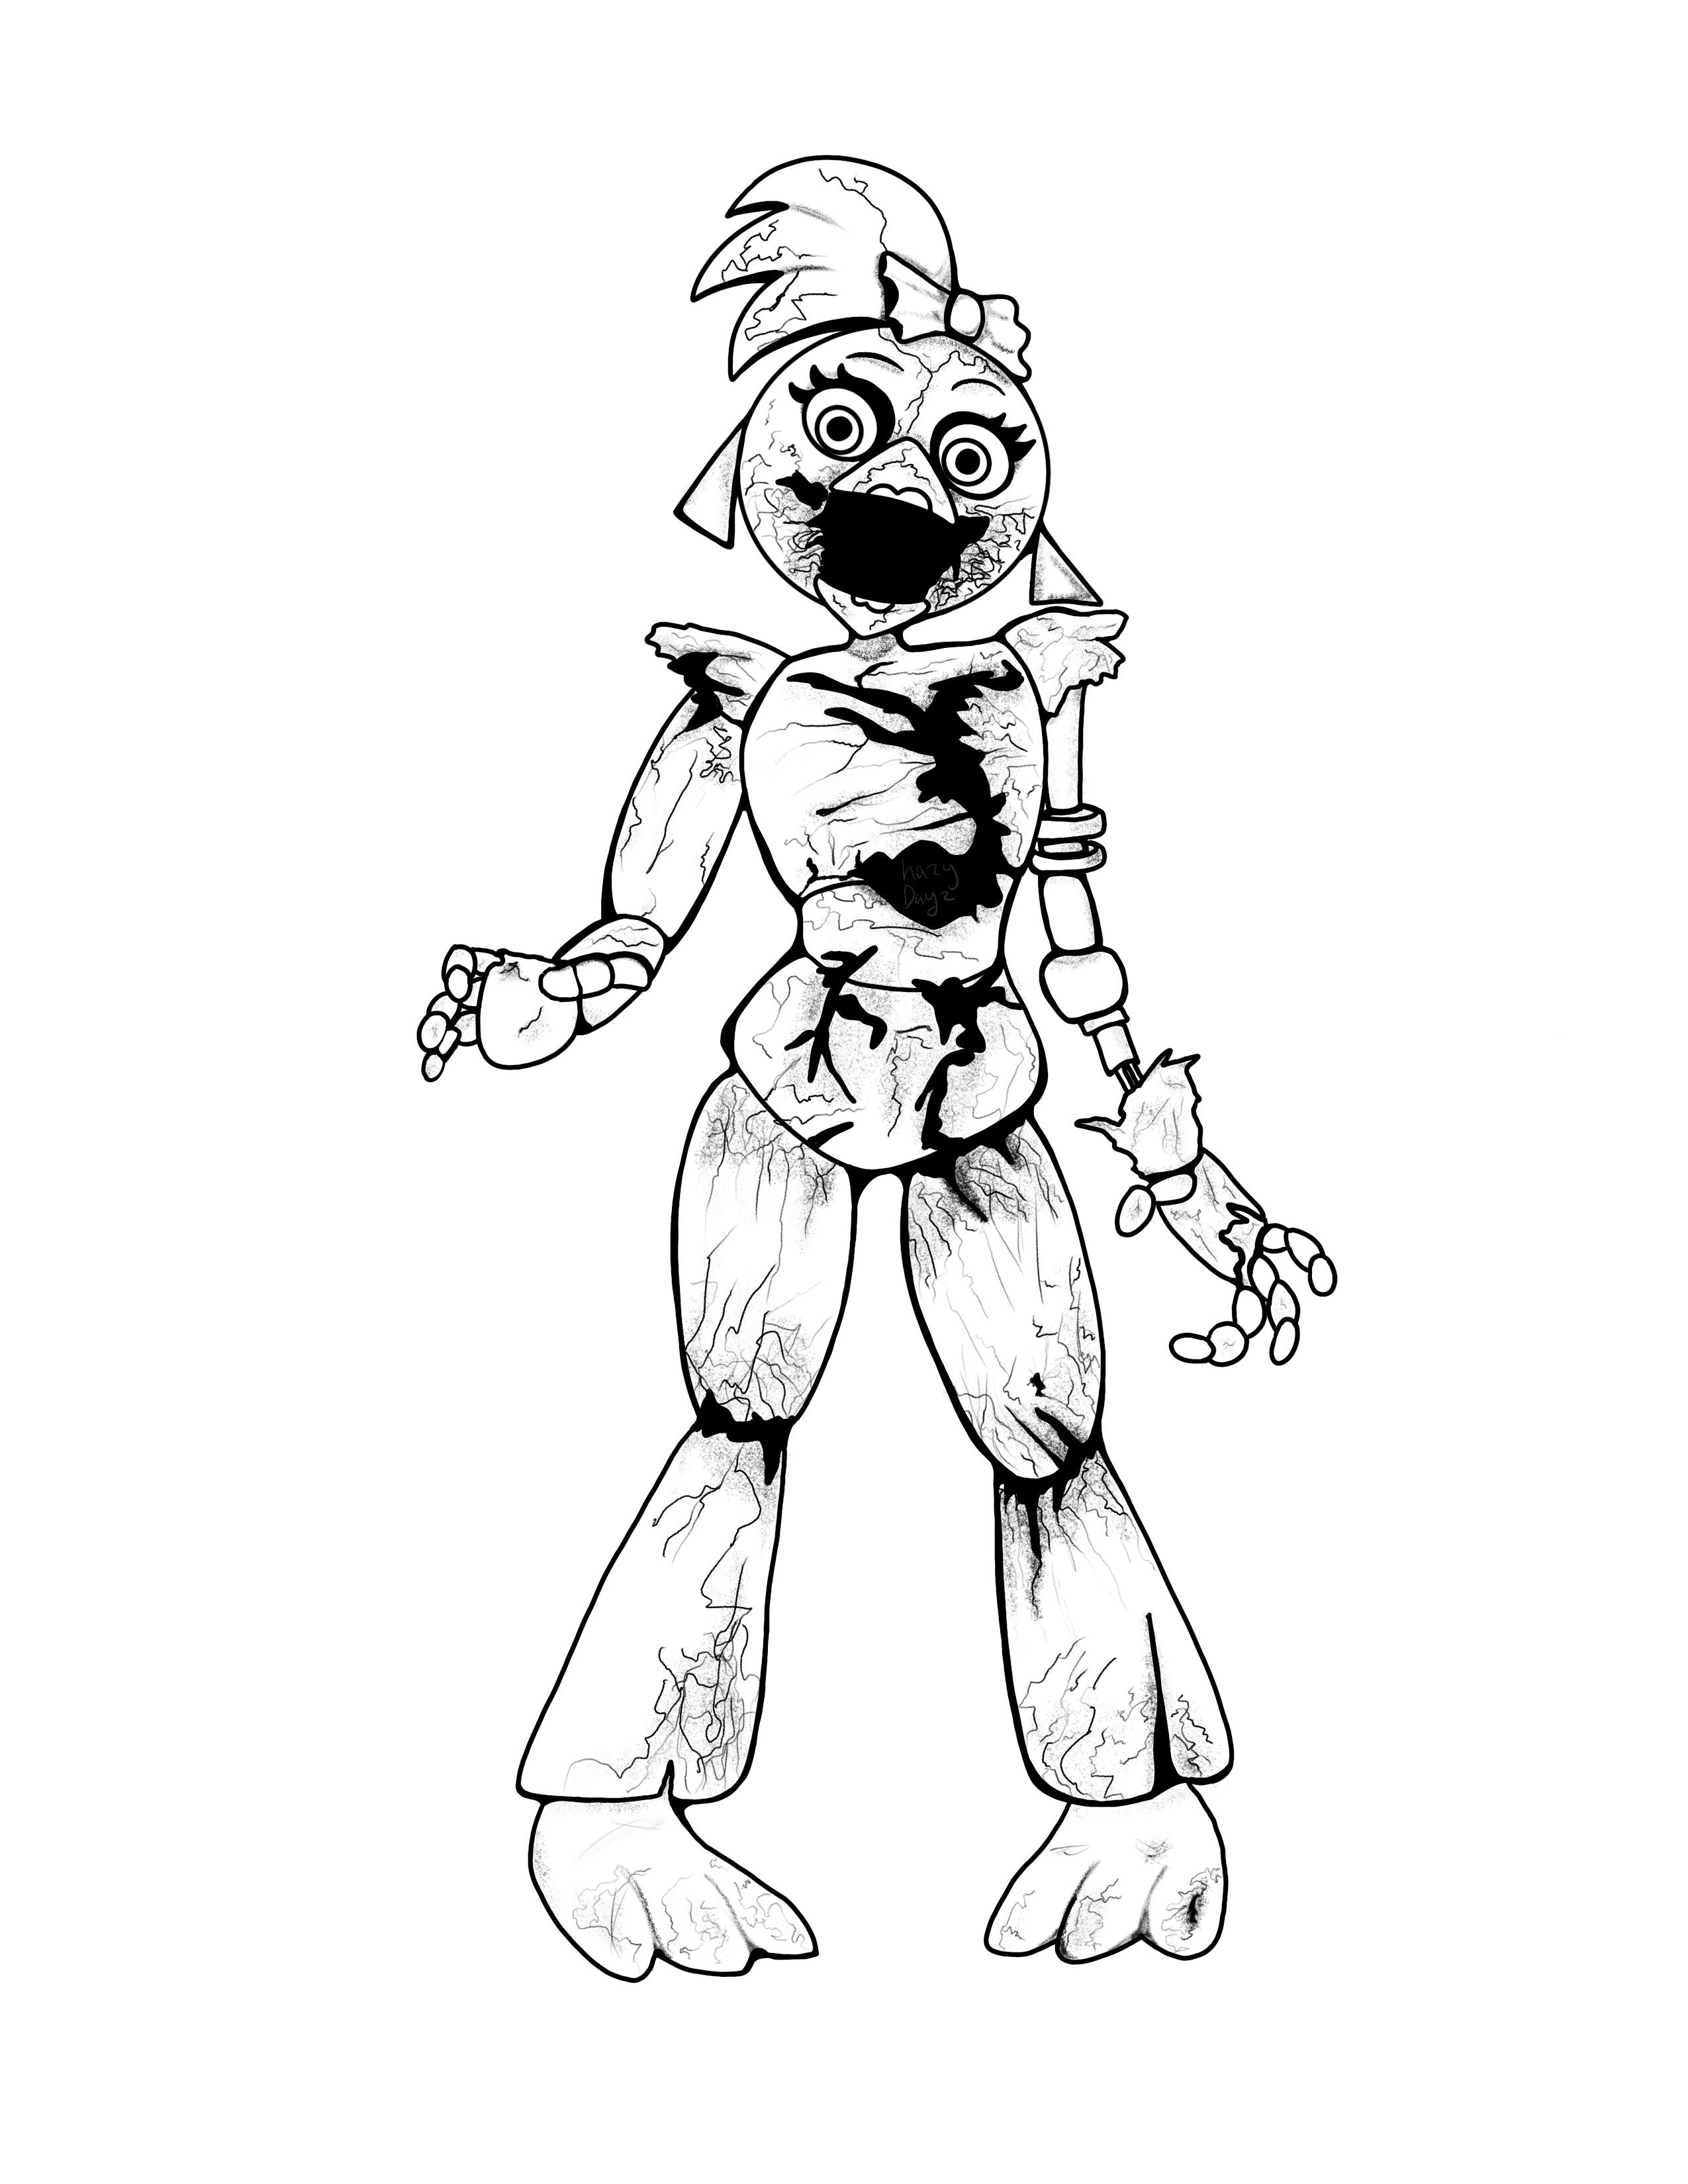 Line art only shattered glam chica by hazydayzart on